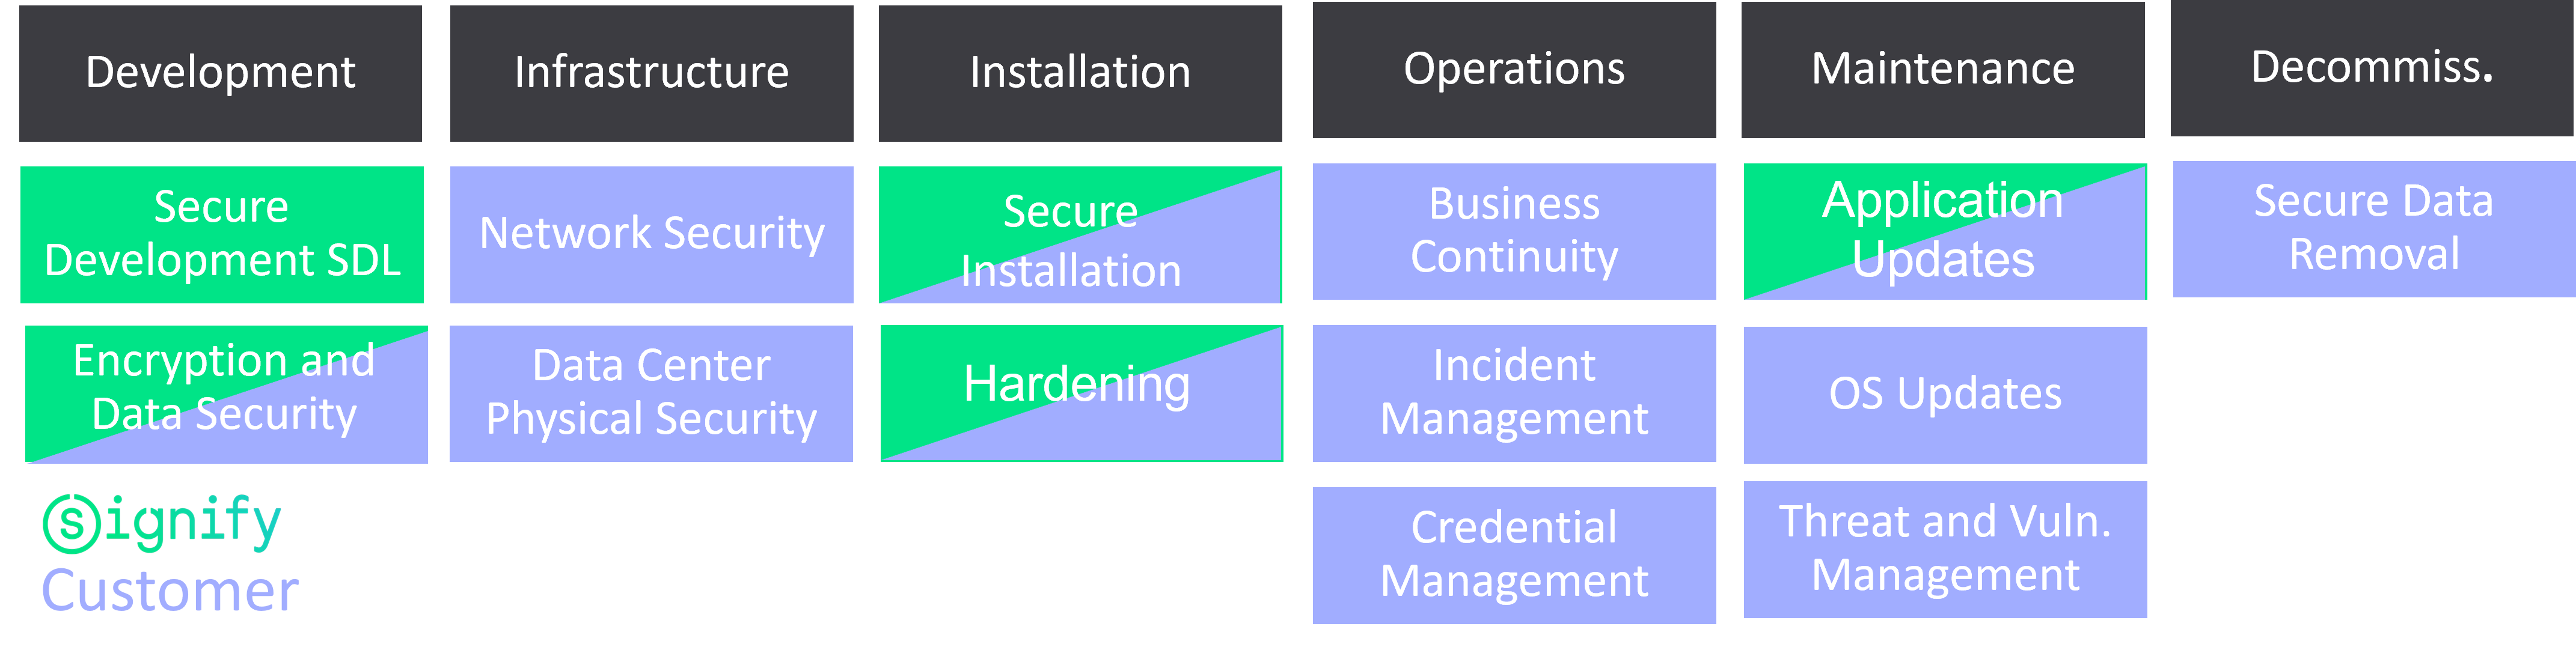 RESPONSIBILITIES FOR ON-PREMISE COMPONENTS